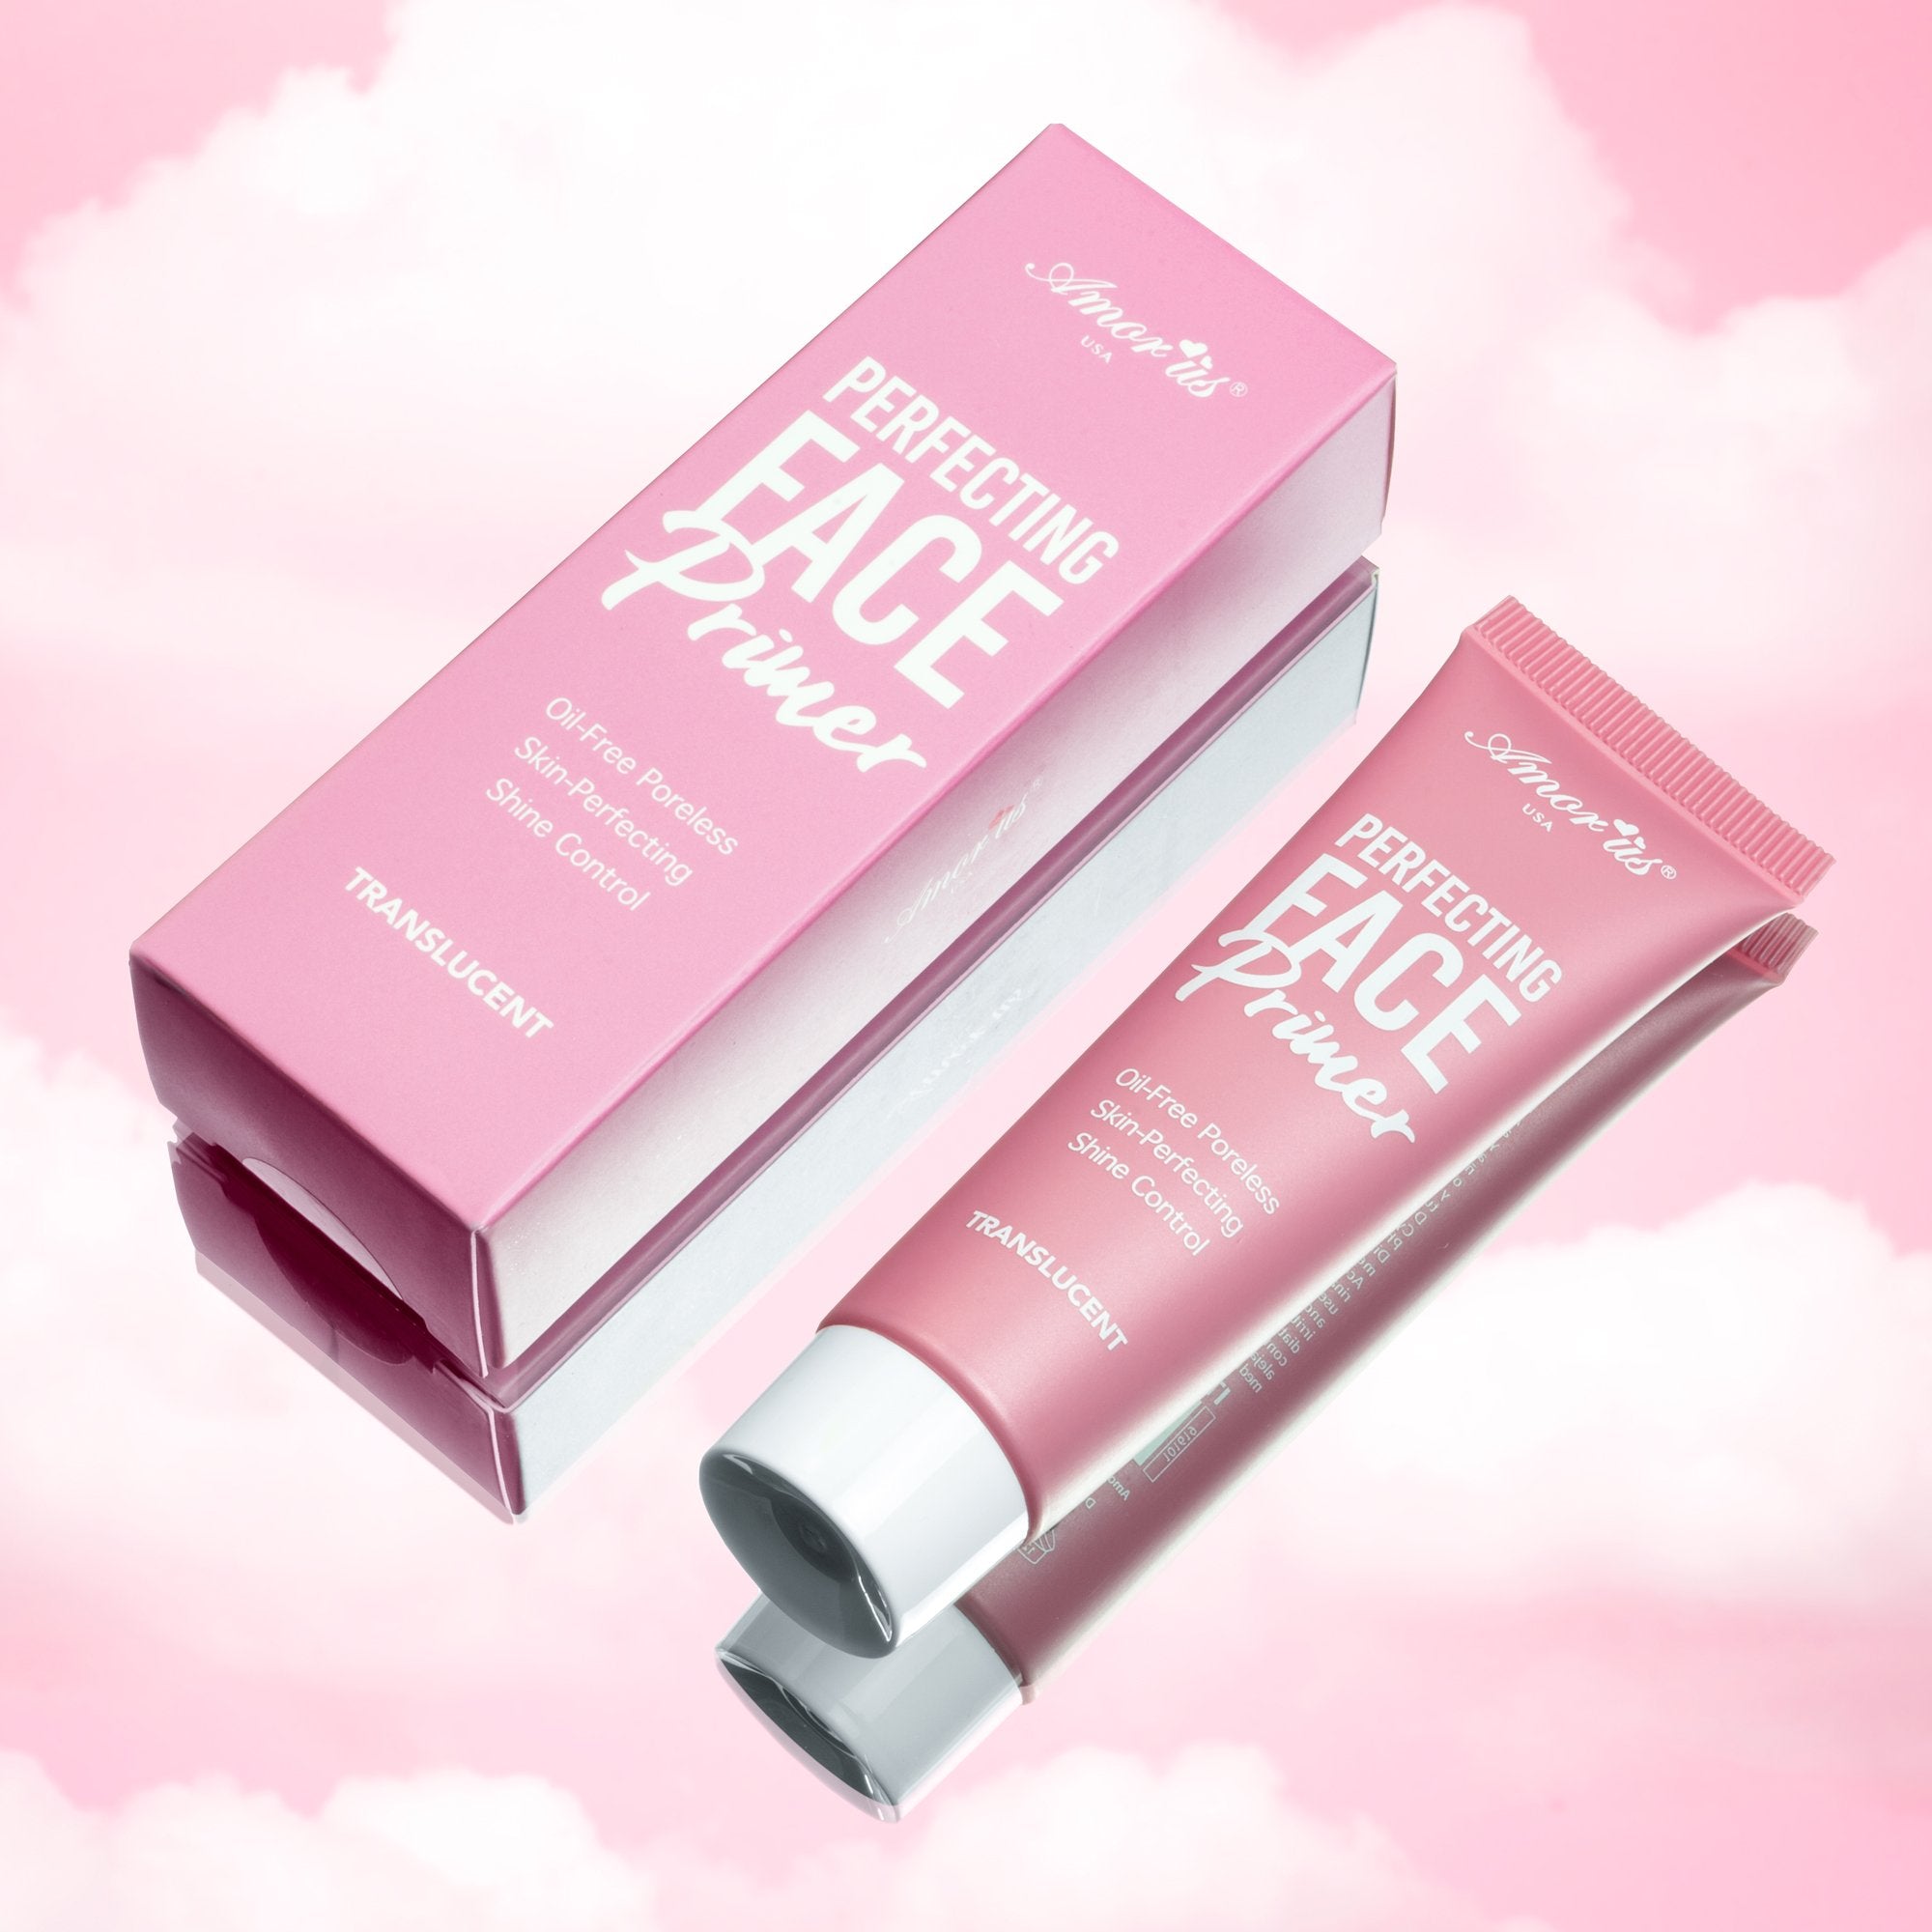 Amor Us - ﻿Perfecting ﻿Face Primer